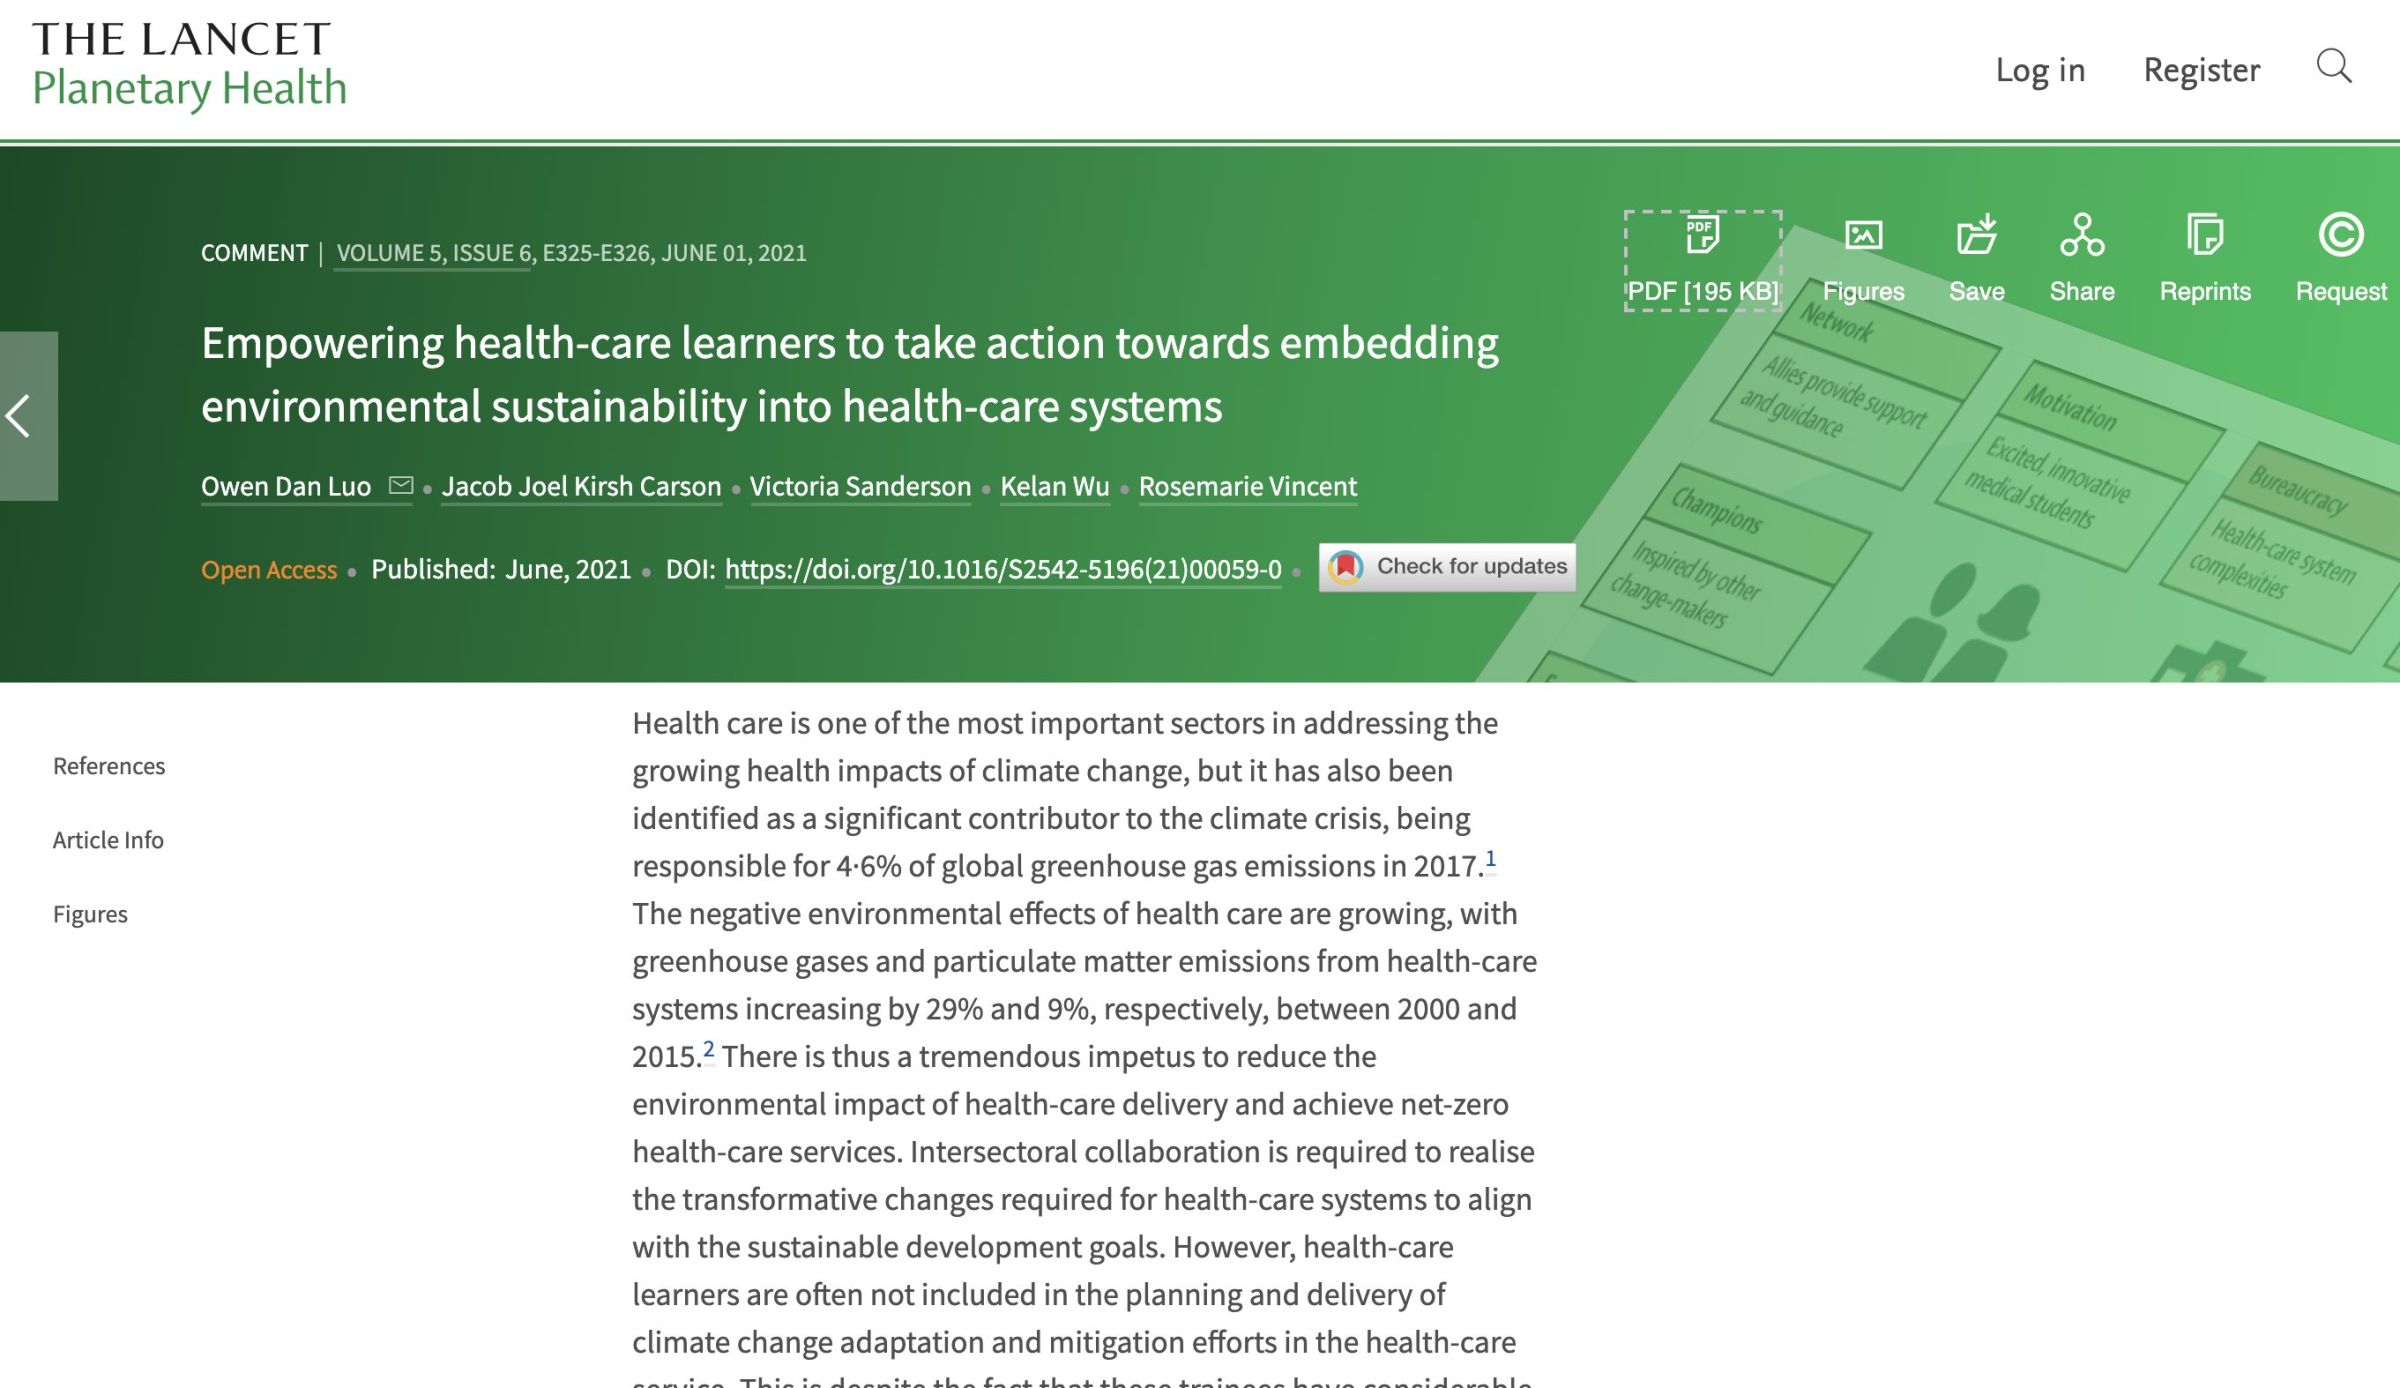 Publication in The Lancet Planetary Health advocating for trainee engagement in healthcare sustainability efforts based on the findings from the Project Green Healthcare/Projet Vert la Santé program that Owen founded.